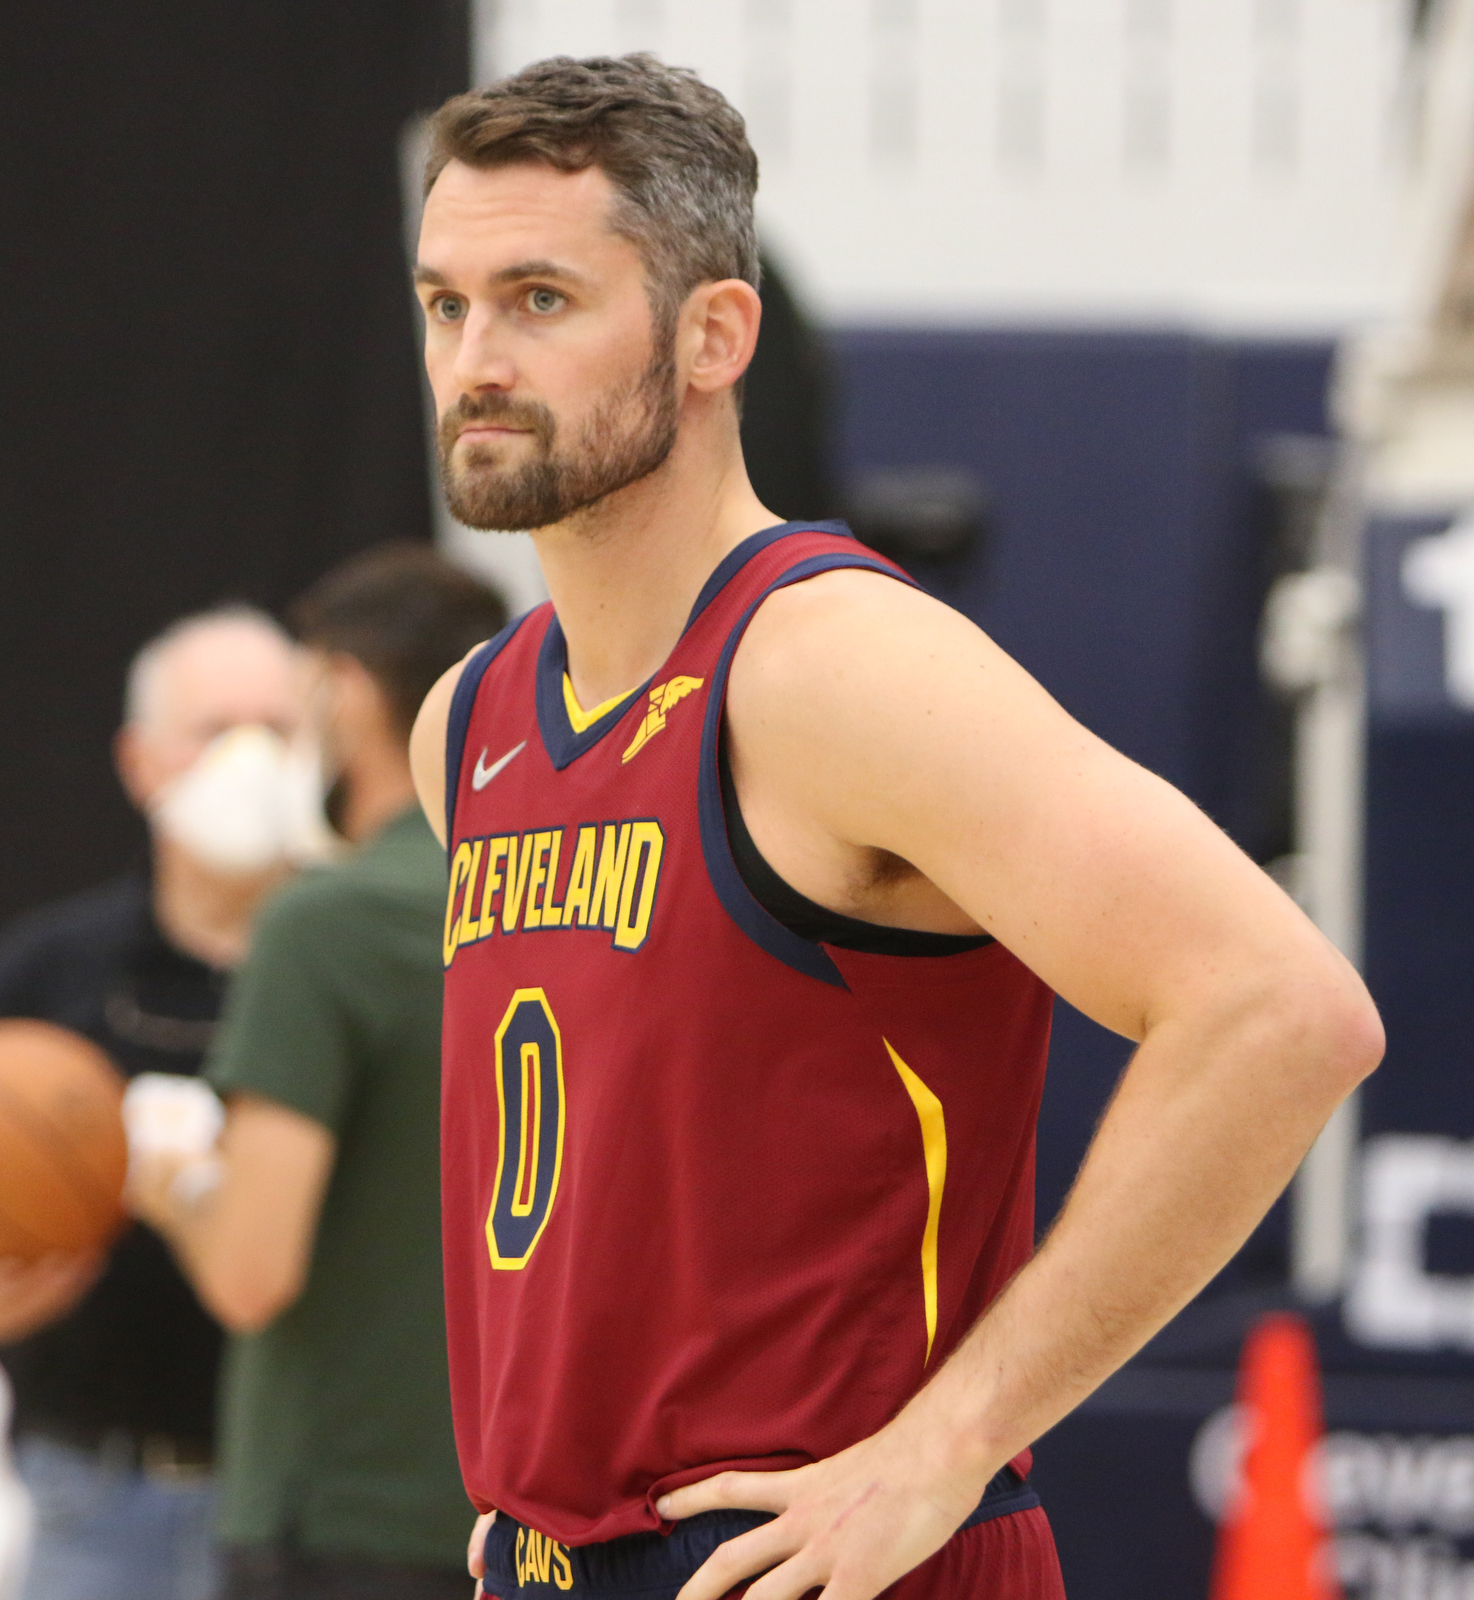 Kevin Love says he plans to play long time for Cavs